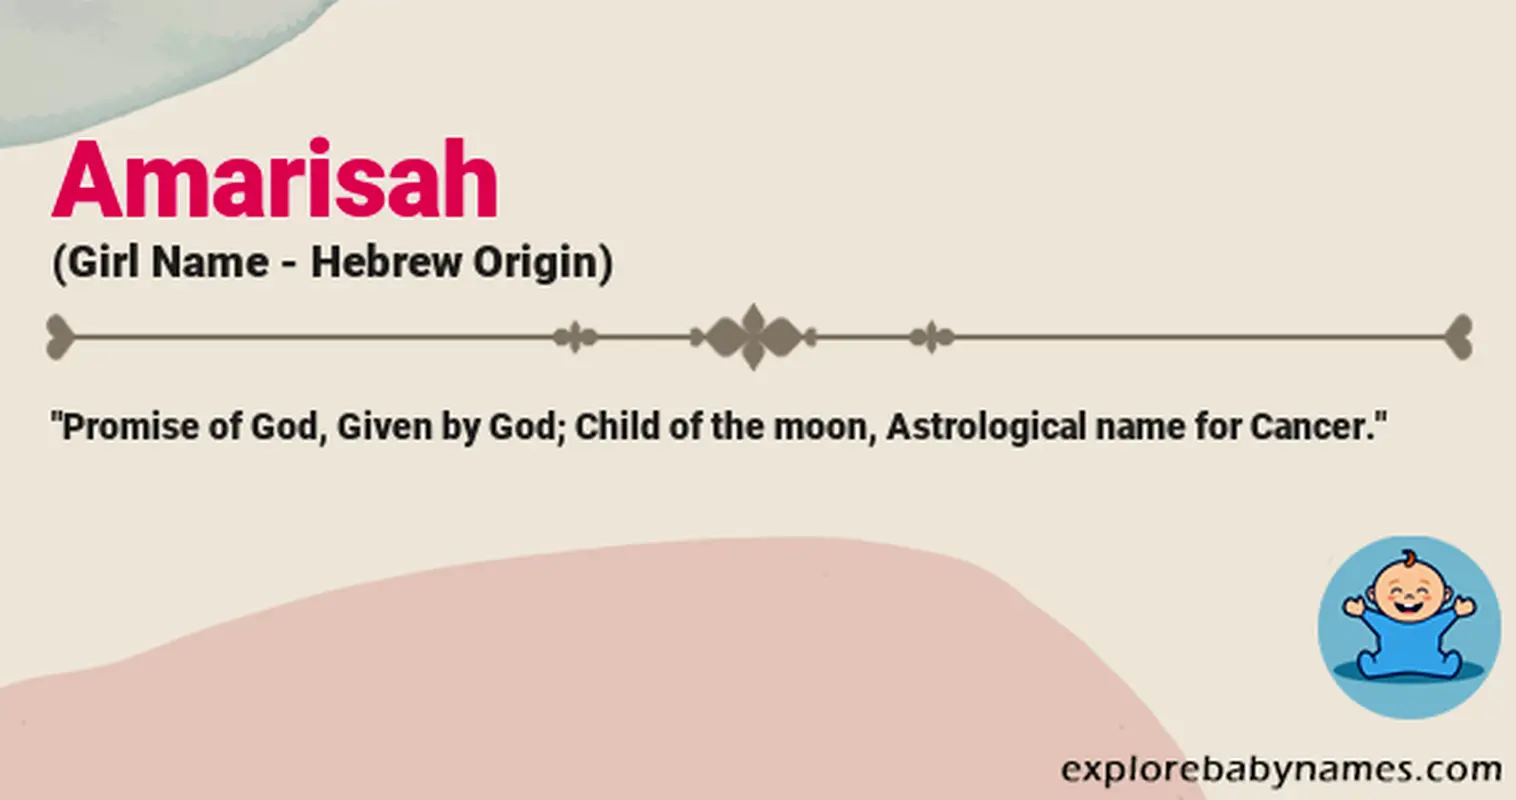 Meaning of Amarisah